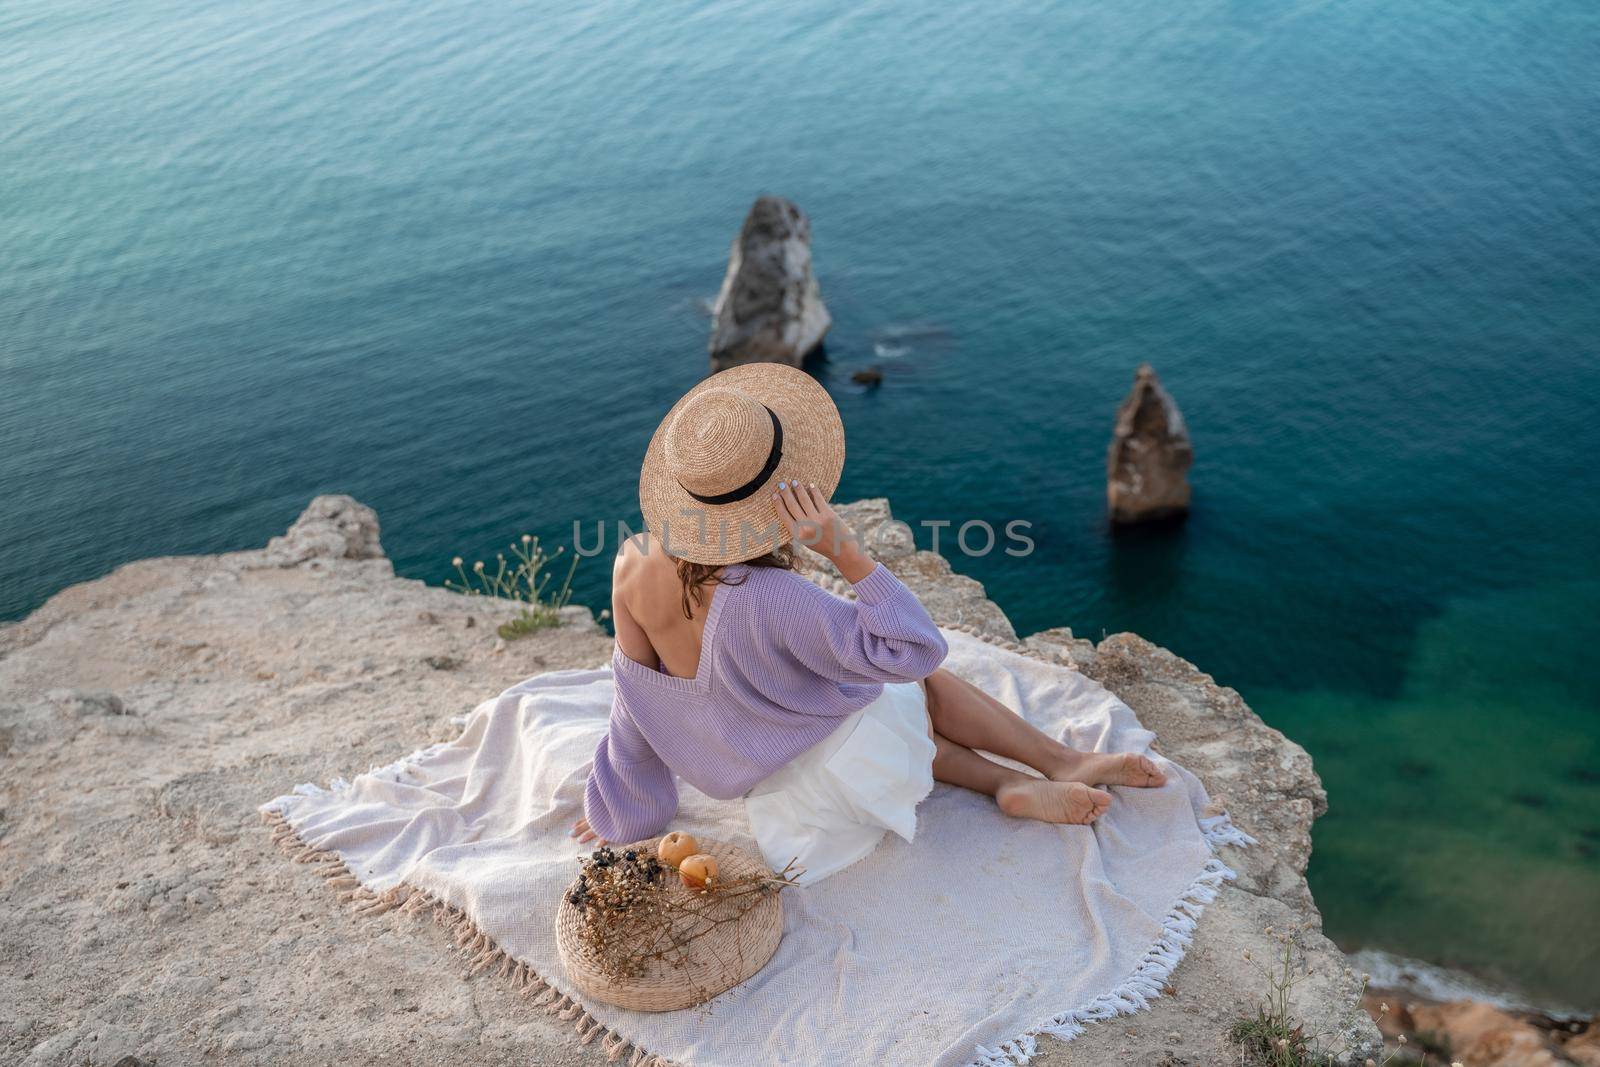 Street photo of a beautiful woman with dark hair in white shorts and a purple sweater having a picnic on a hill overlooking the sea.